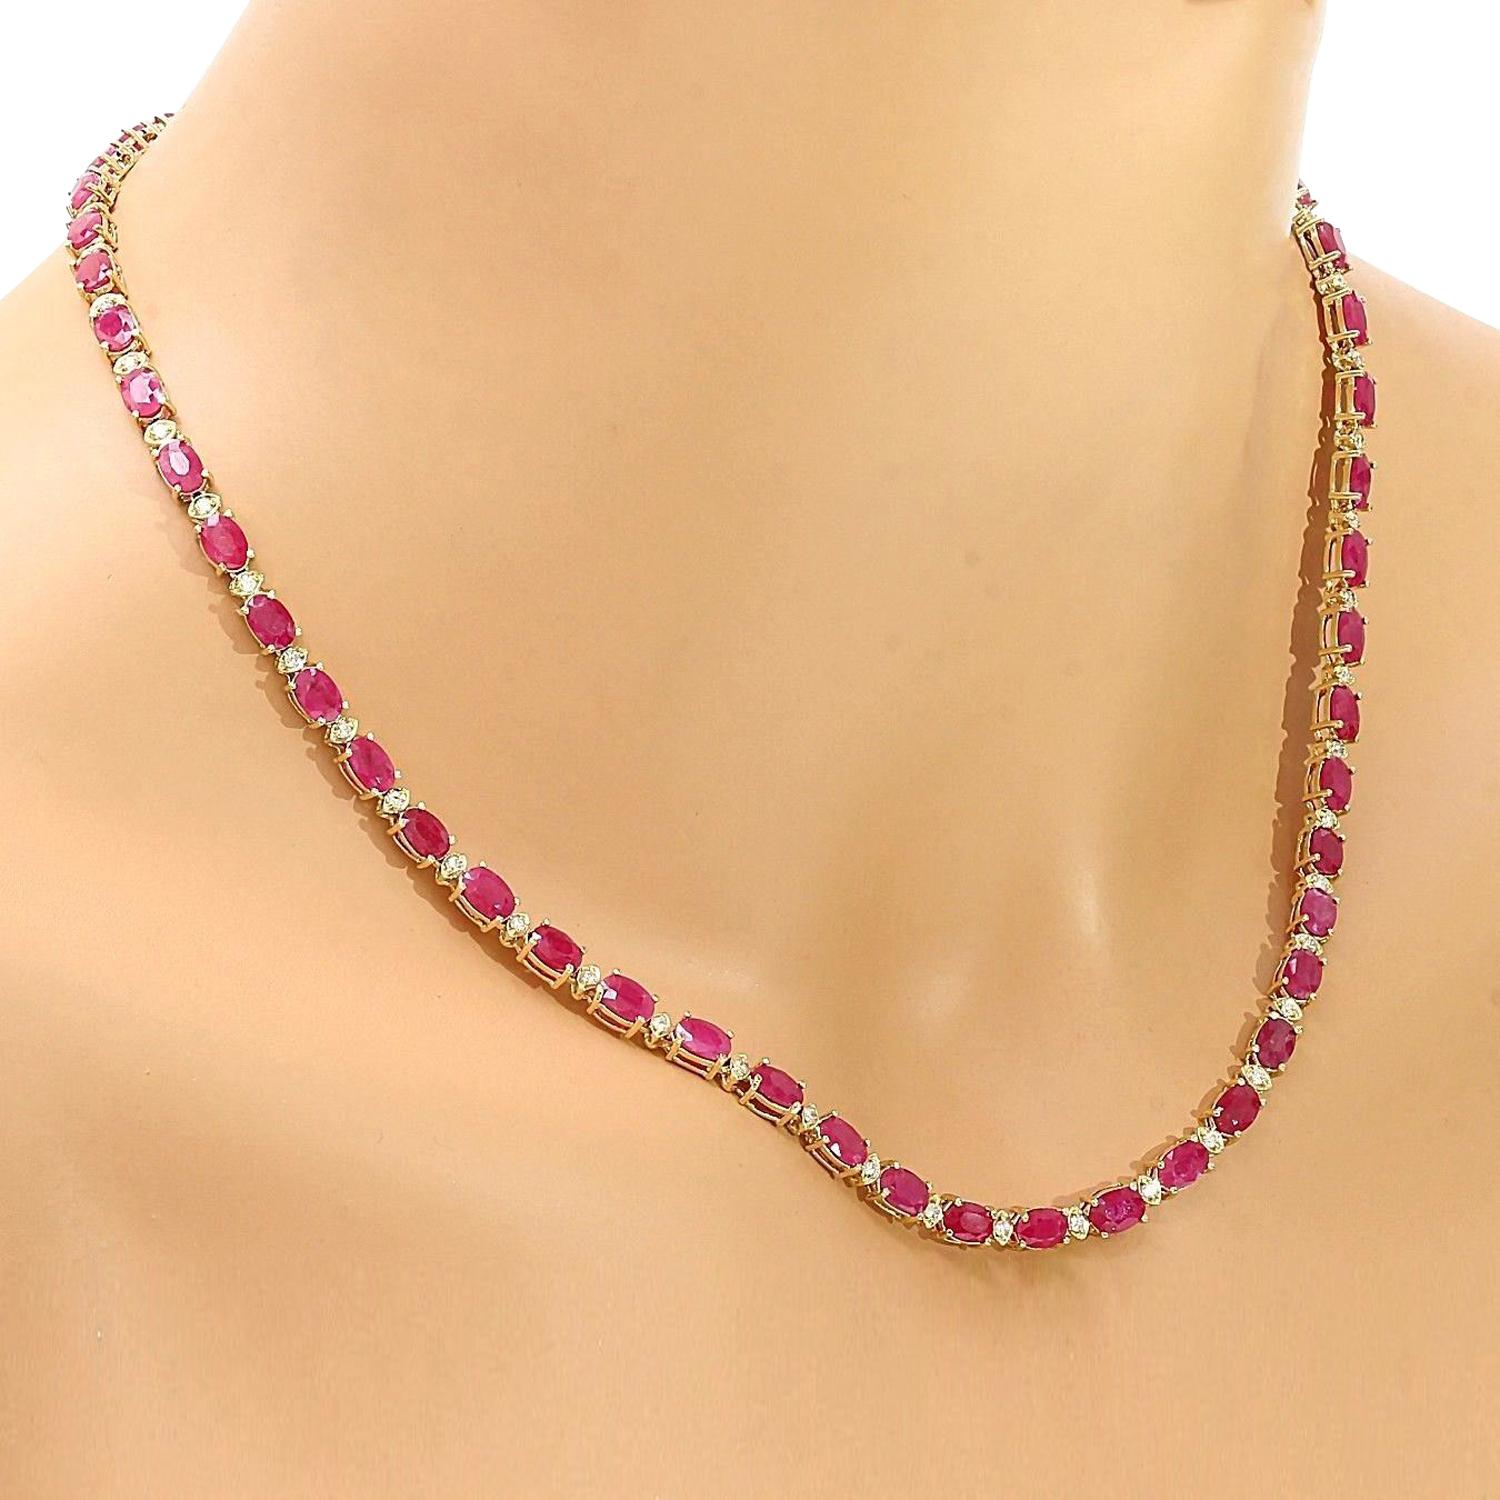 Presenting our exquisite 30.75 Carat Ruby 14K Solid Yellow Gold Diamond Necklace. This tennis-style necklace features a stunning oval-shaped Ruby, weighing 29.50 carats, exuding a rich red hue. Adorning the sides are dazzling Diamonds totaling 1.25